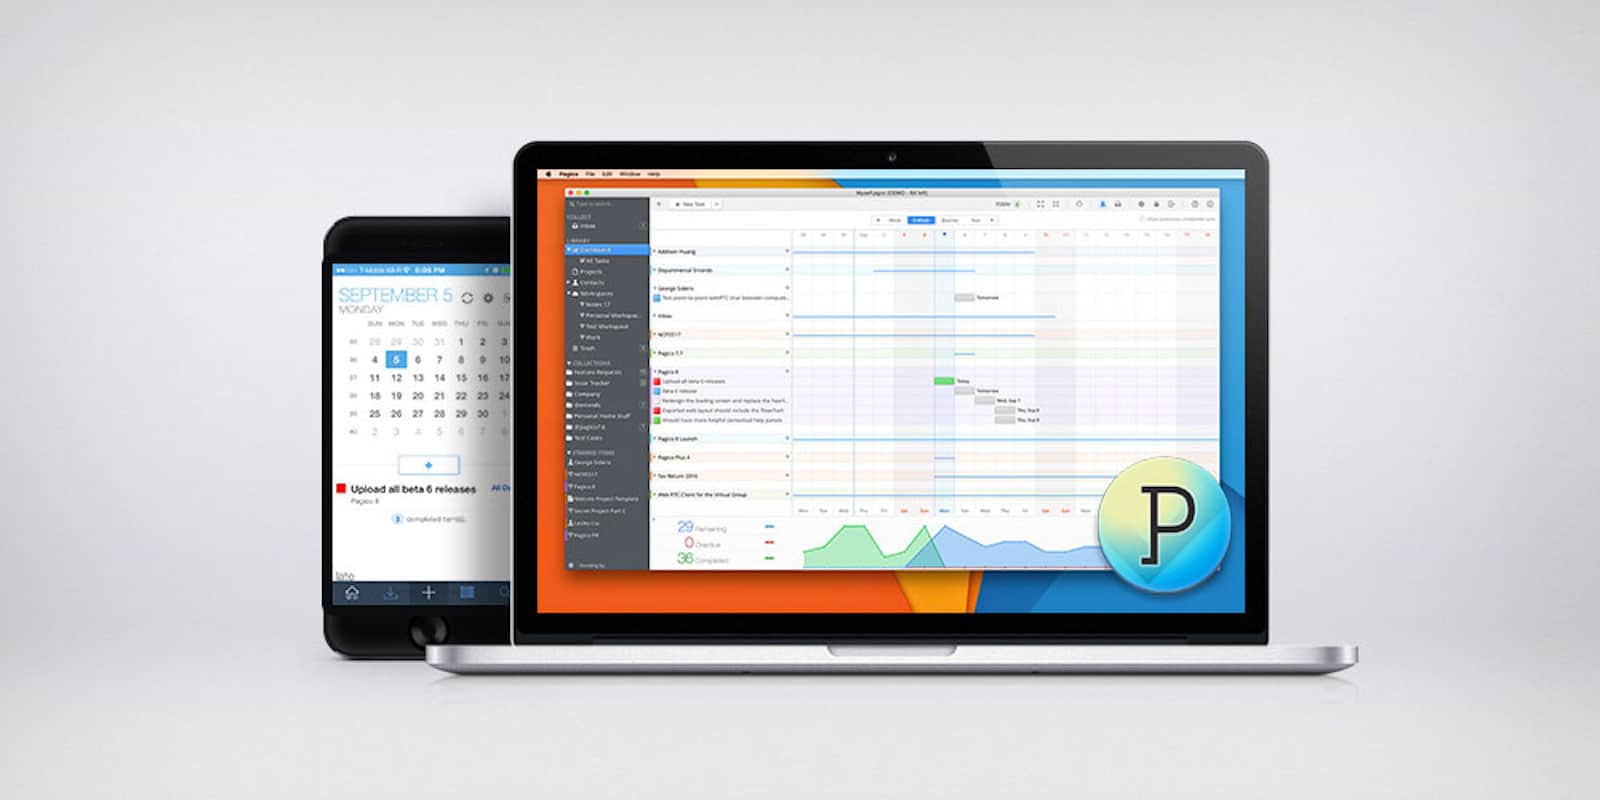 Pagico goes way beyond pen and paper to help you stay on-task and organized, and looks great in the process.